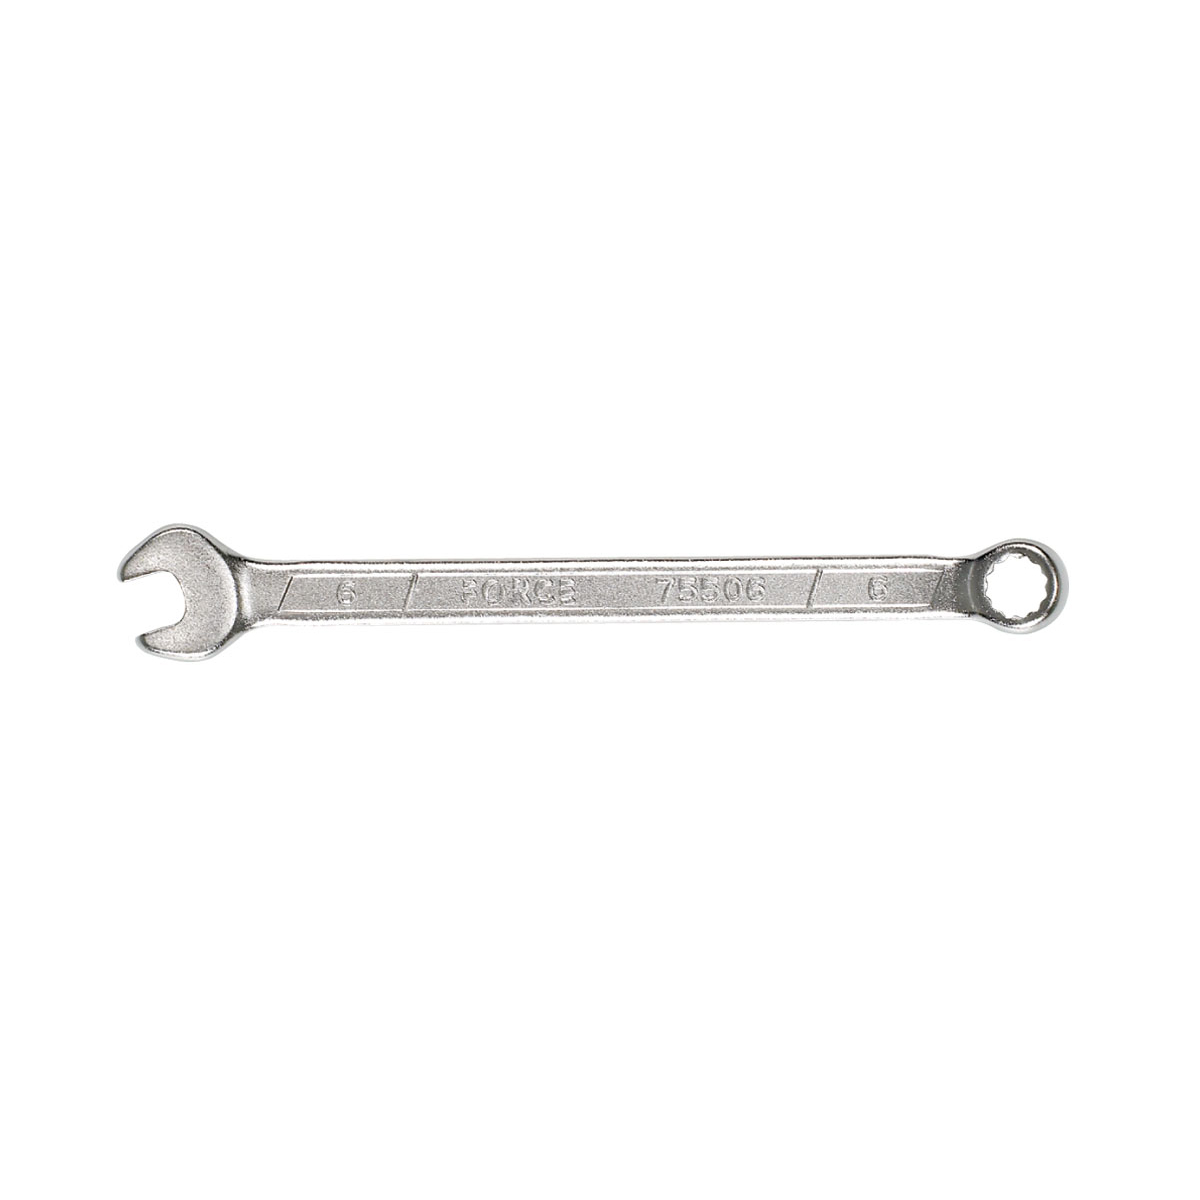 CYCLO 15mm Spanner